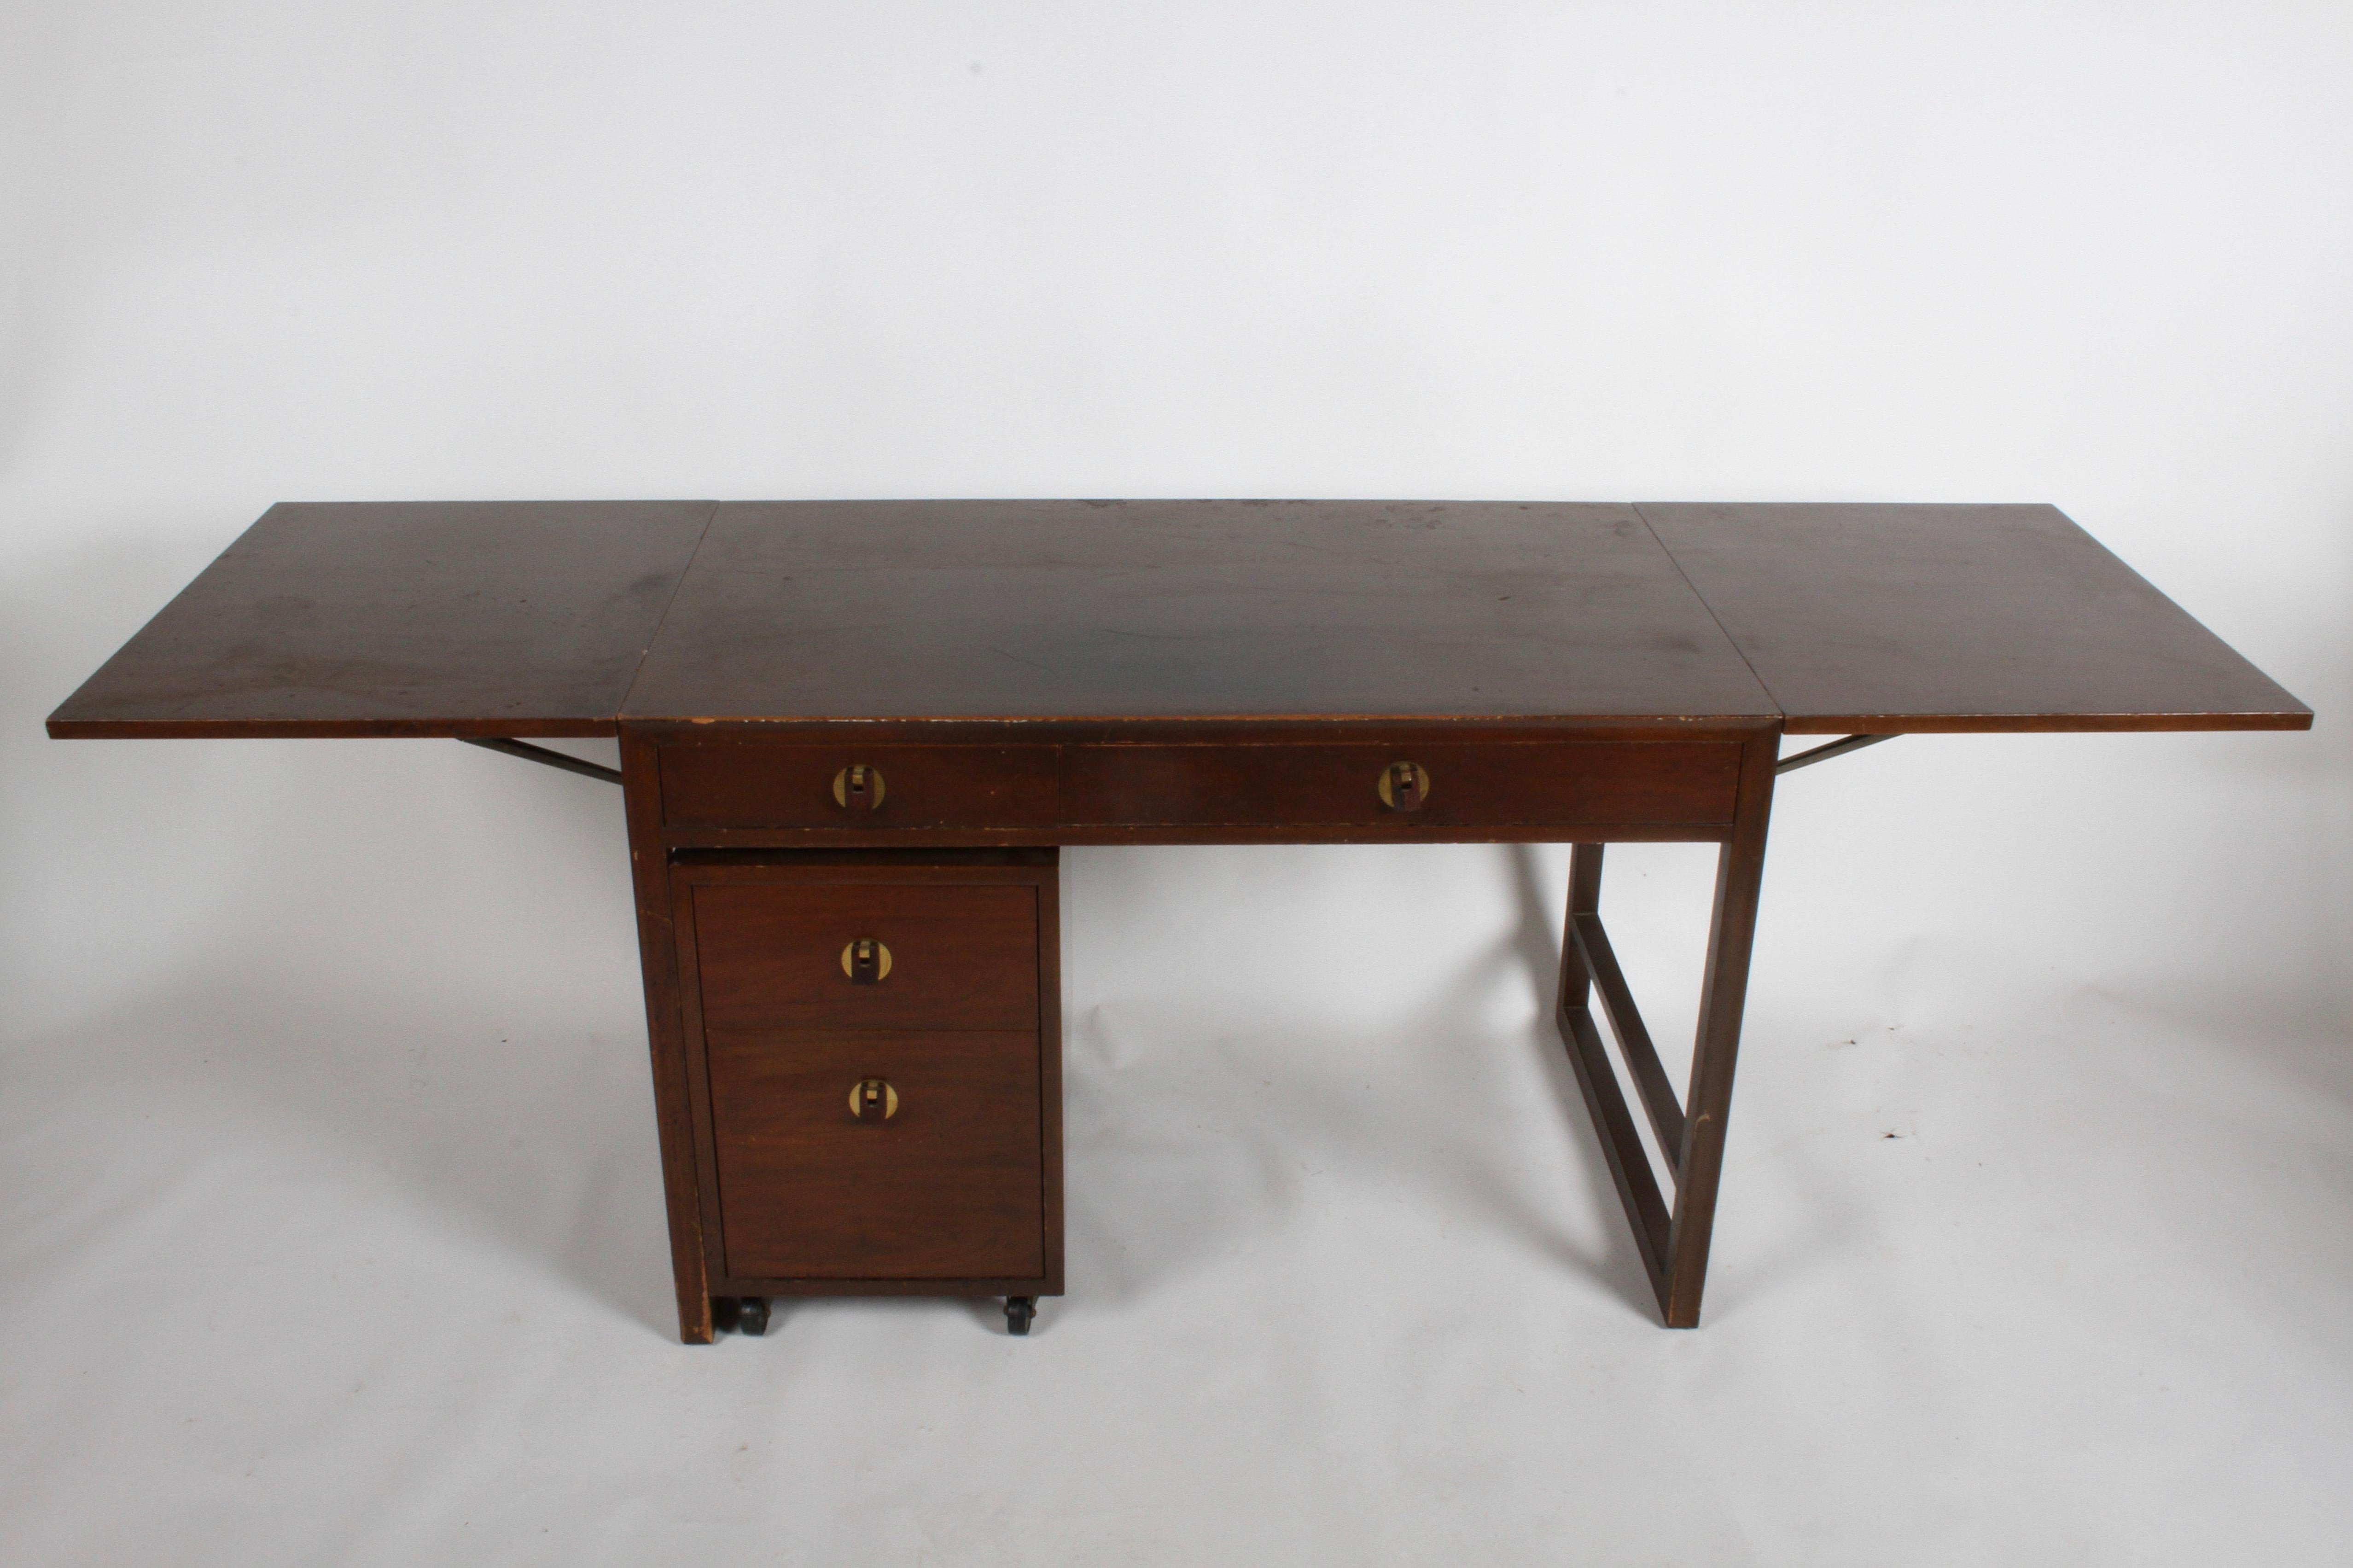 Uncommon Mid-Century Modern Edward Wormley model no.301-A designed compact desk for Dunbar, with two drop leaf extensions and model no.302-A pedestal file cabinet on wheels. Desk has two drawers, one large & medium includes pencil holder, with brass